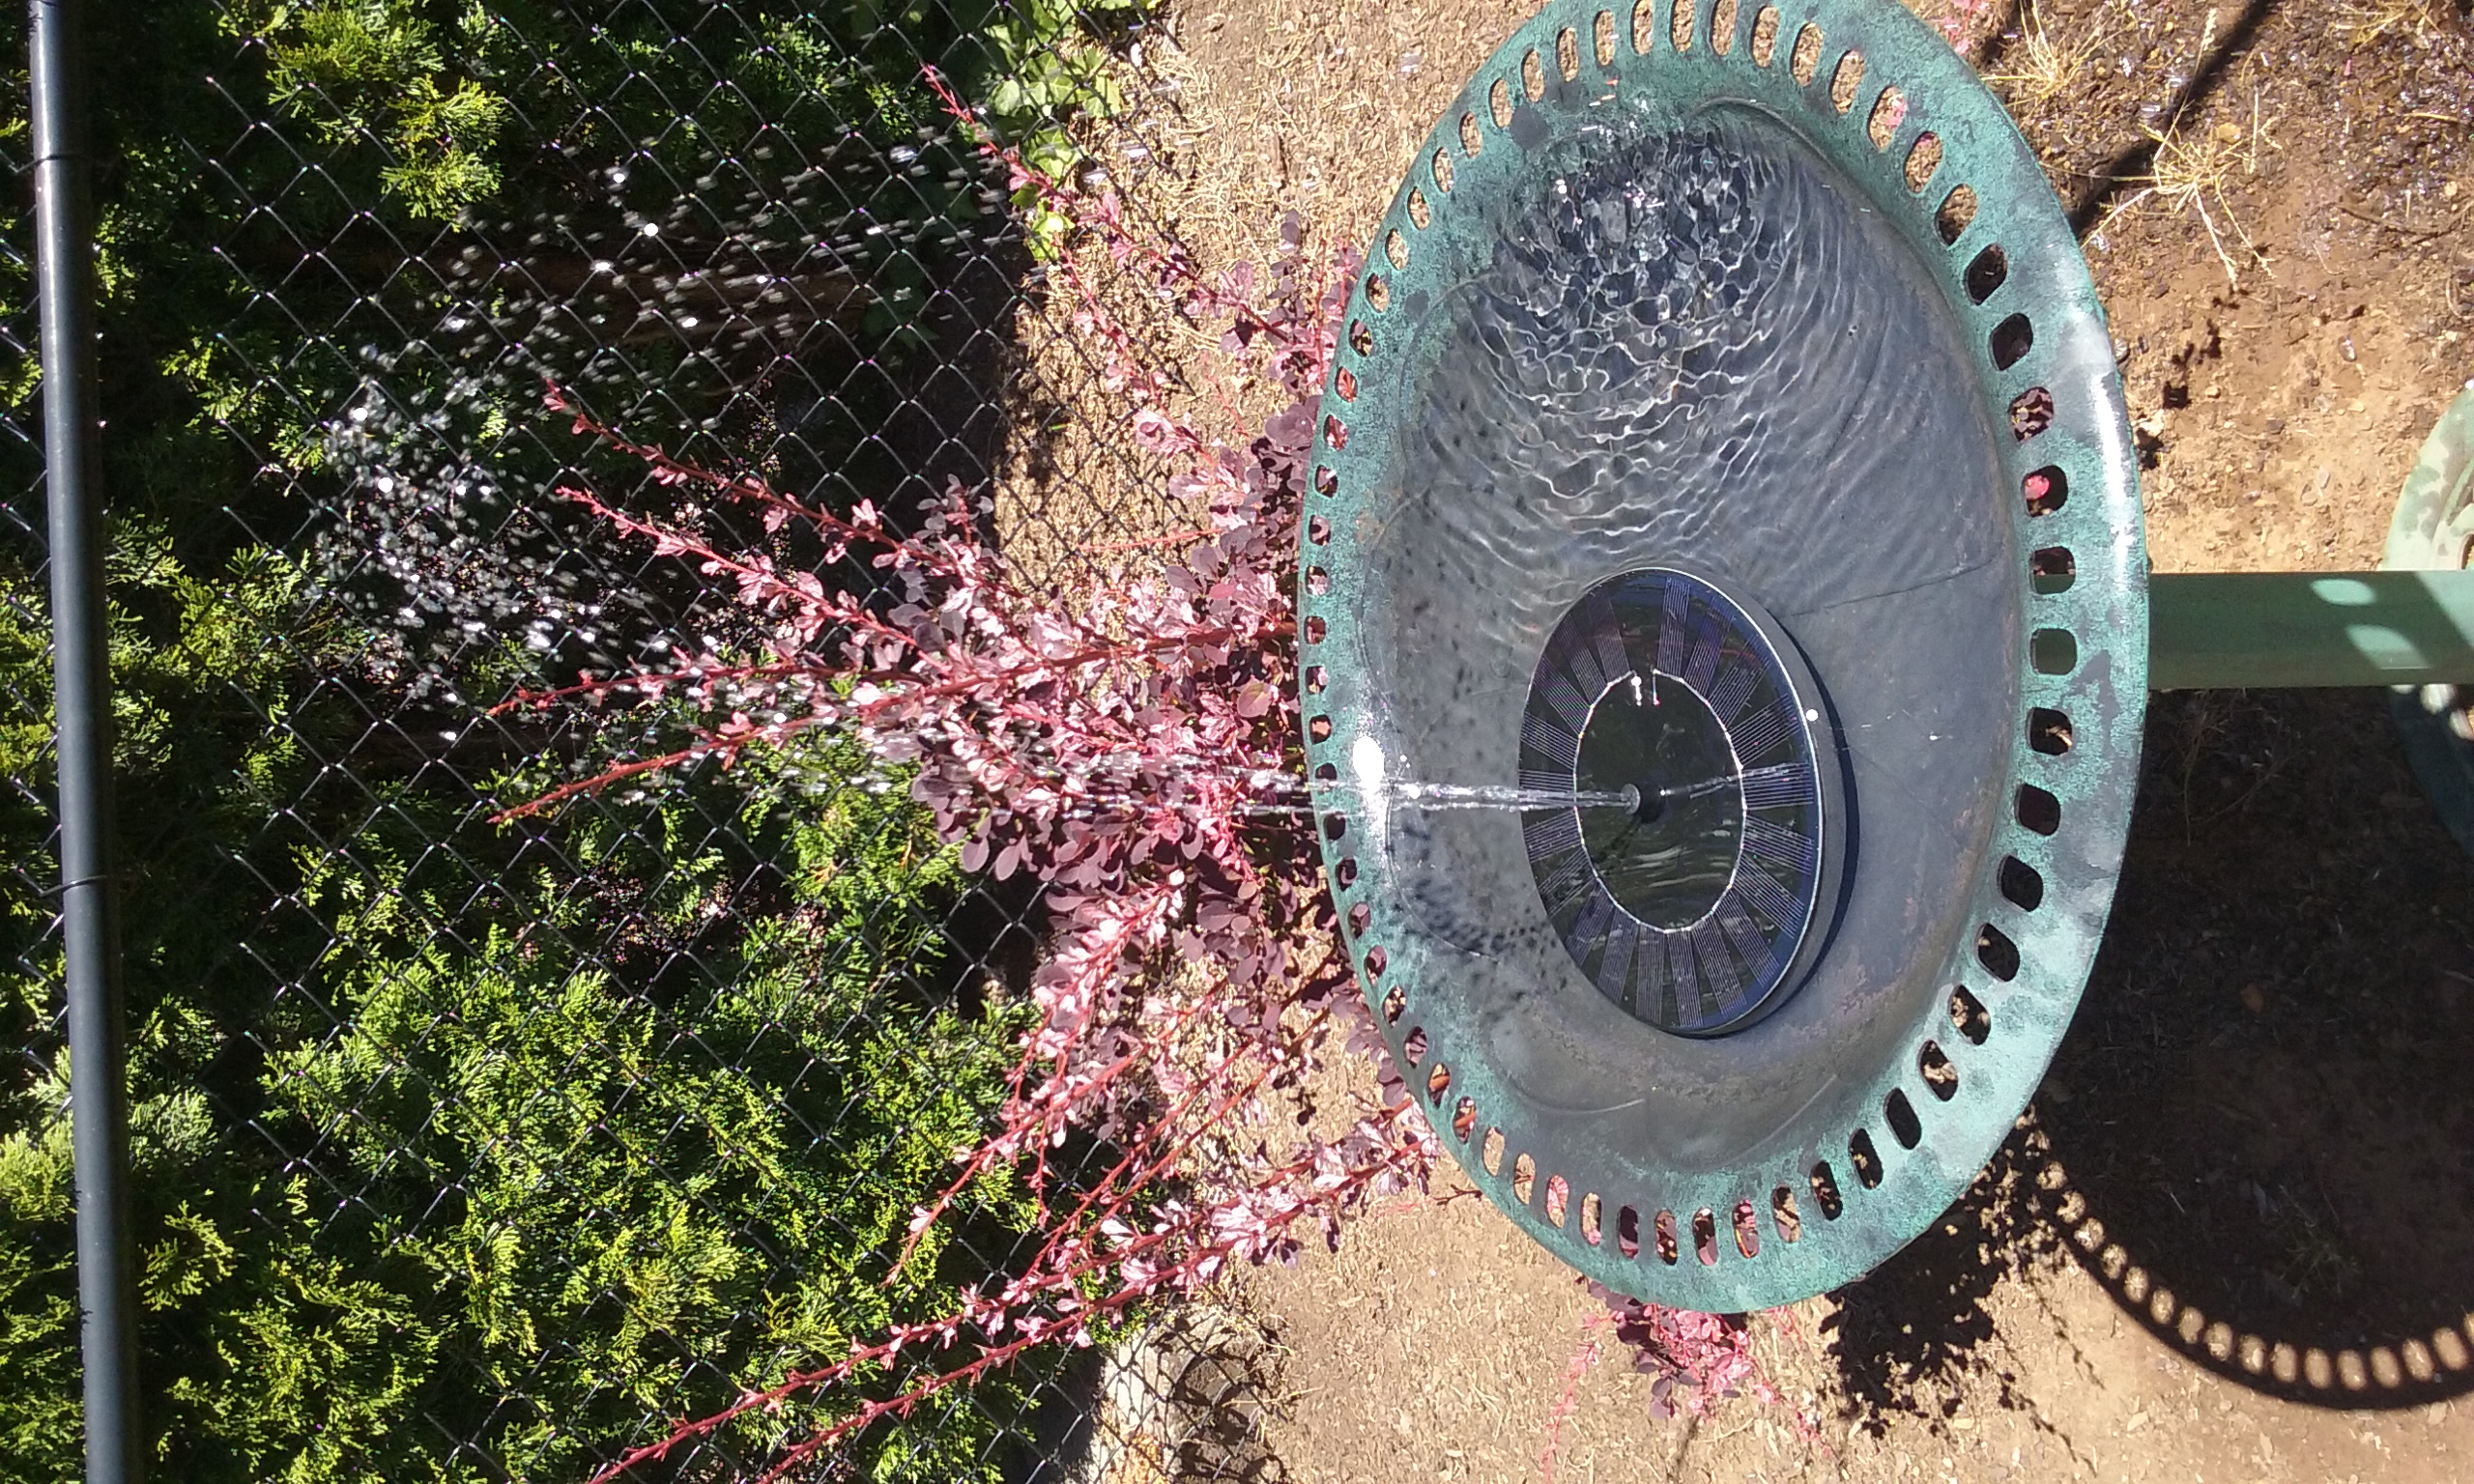 7" SOLAR WATER FOUNTAIN WITH BATTERY BACK UP